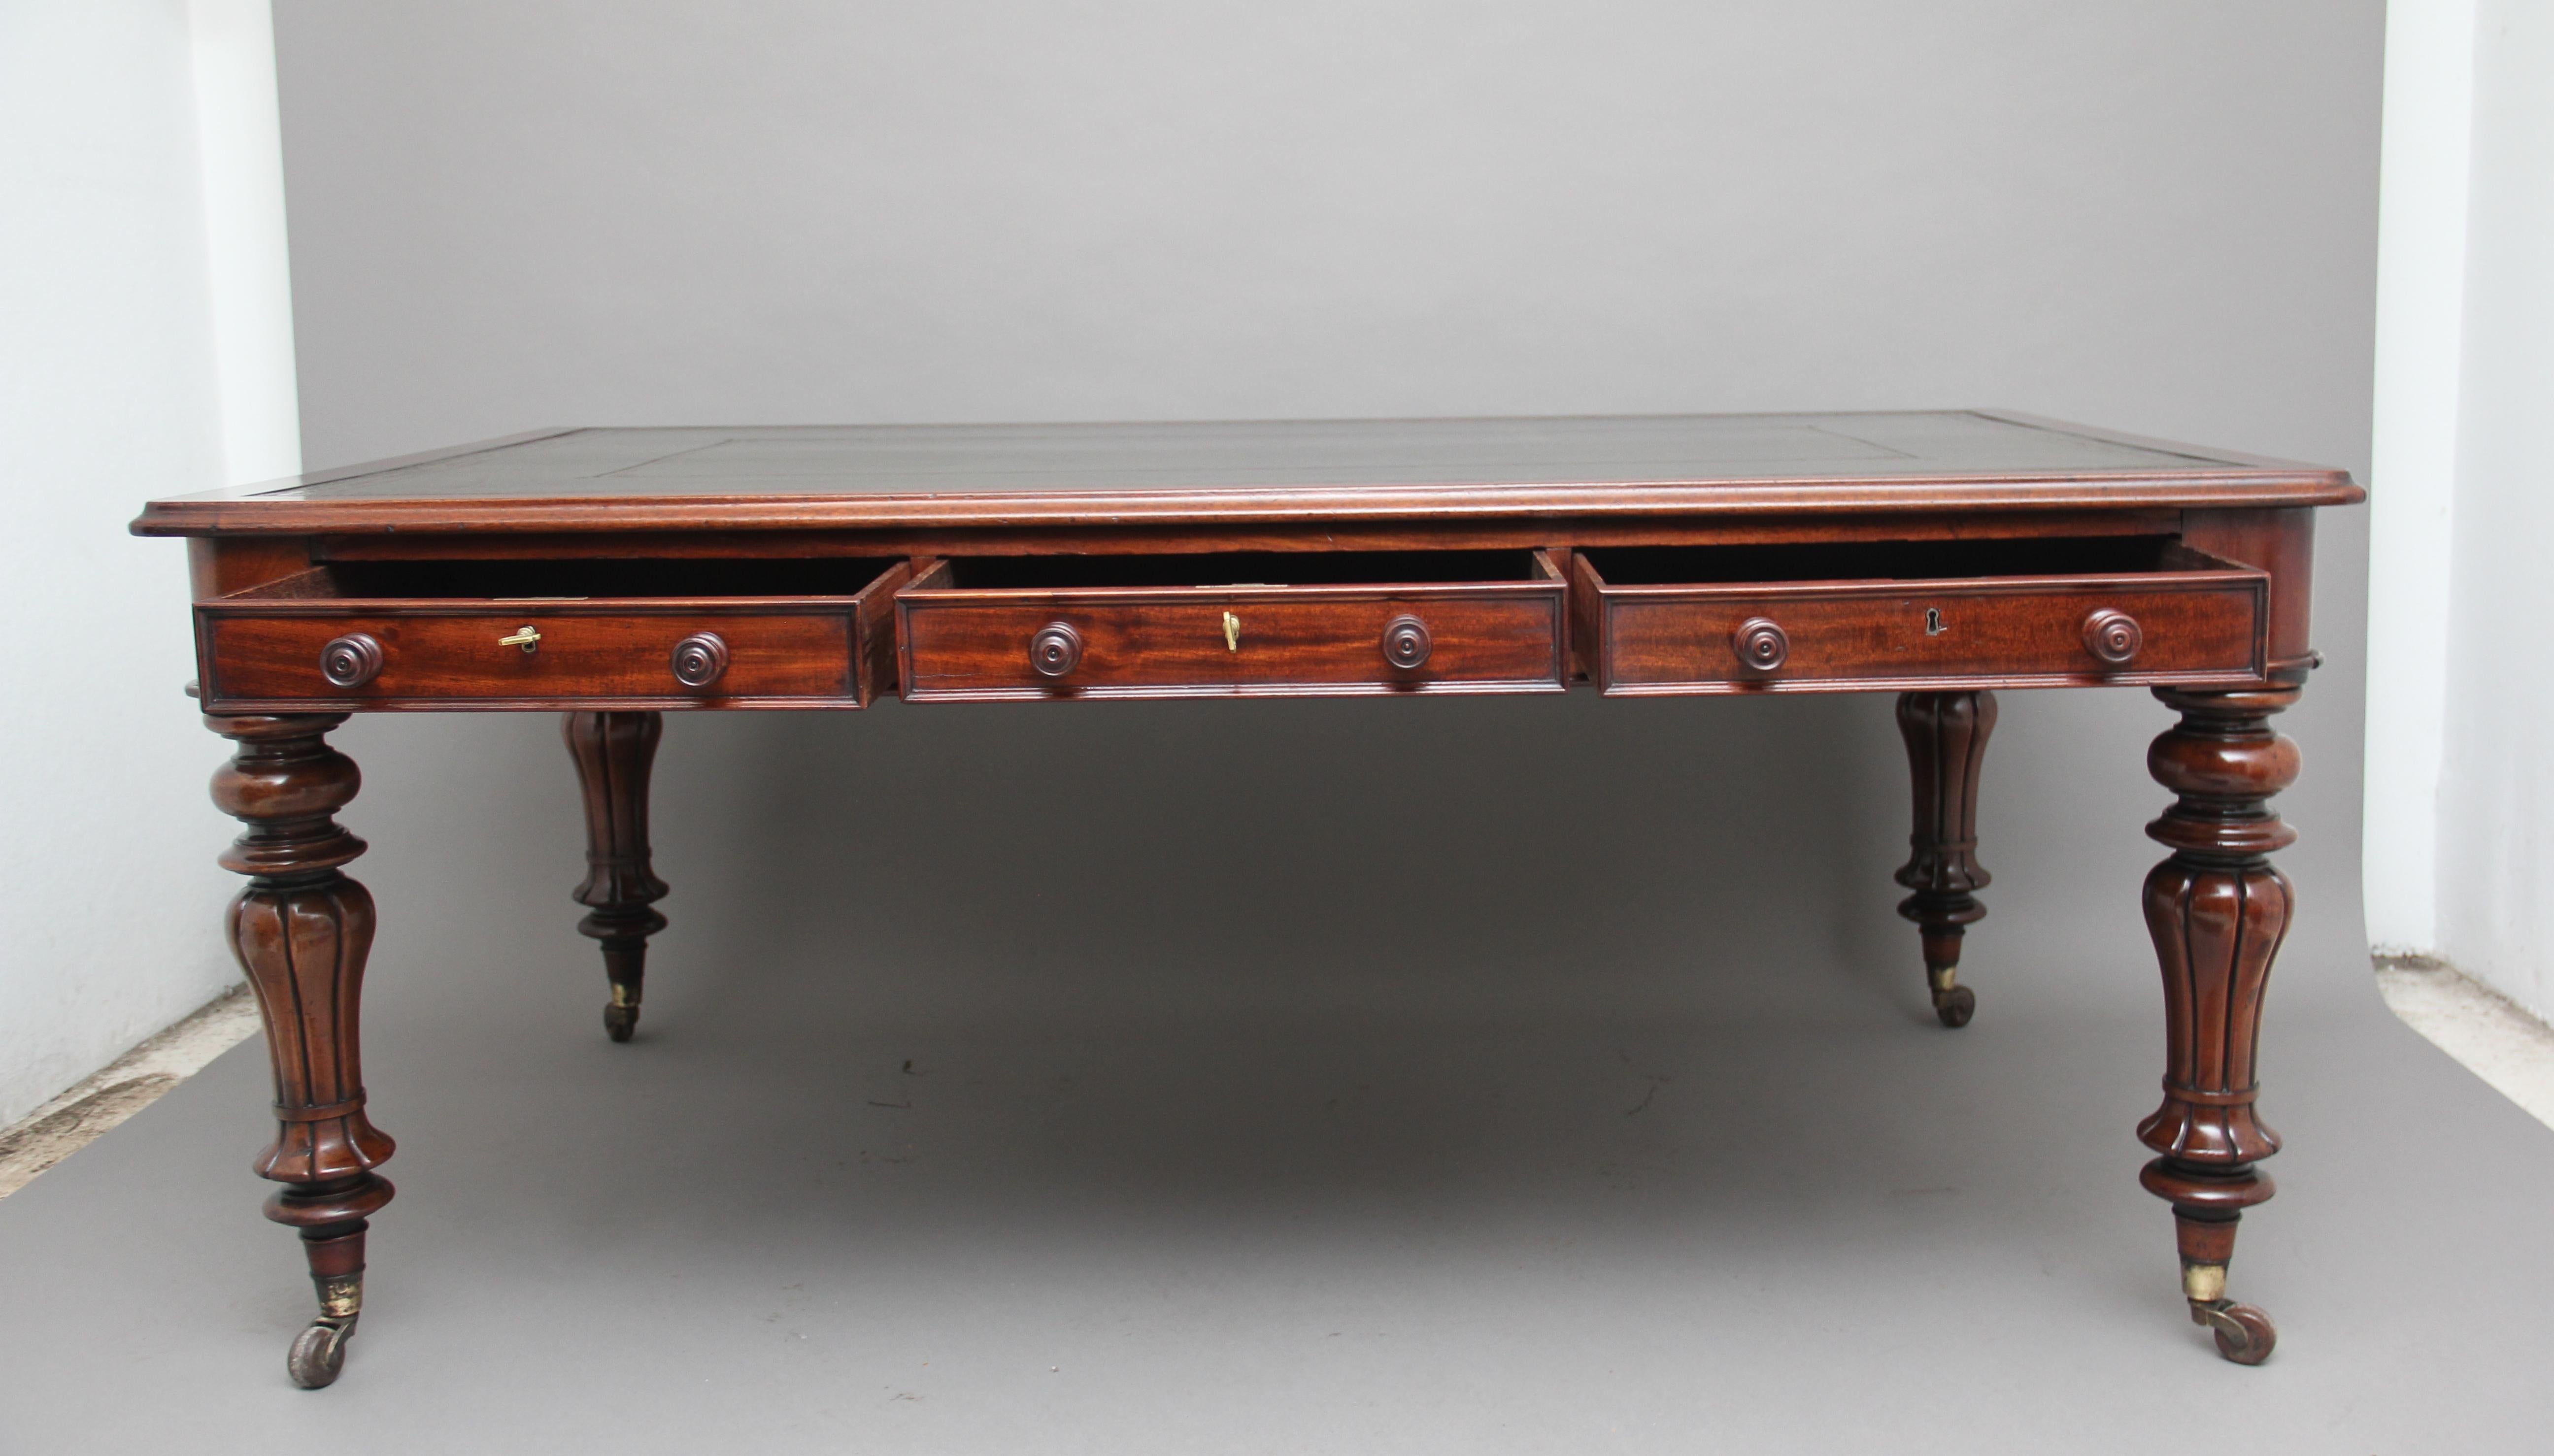 A large mid-19th century mahogany partners writing desk / table, the moulded edge top having a green leather writing surface decorated with gold and blind tooling, having six mahogany lined frieze drawers with mahogany wooden knob handles, standing